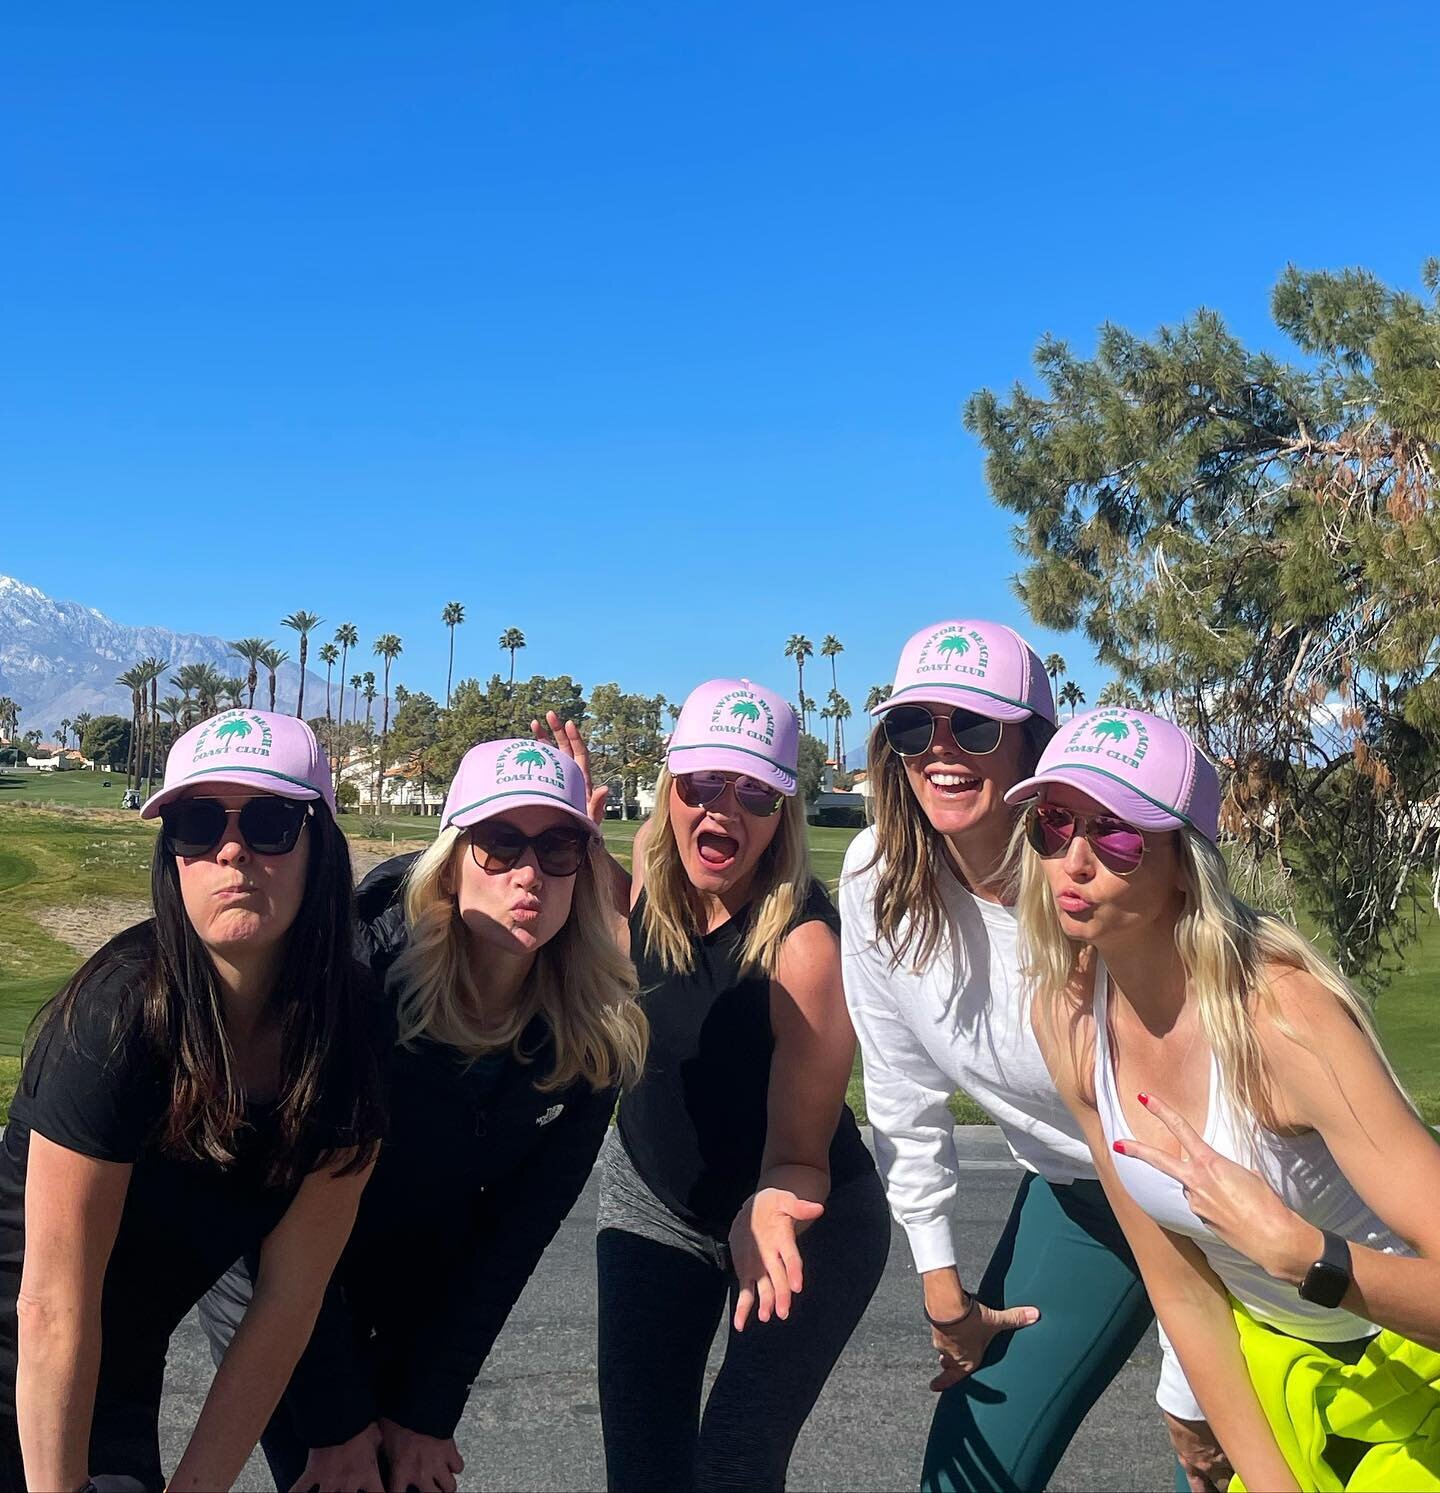 Wanna twin with us??? Though we were not in Newport on this trip, this hat was must. Currently at Target!

And what&rsquo;s a walk without some &ldquo;grounding&rdquo;, sunshine and ridiculousness?

#palmdesert #girlstrip #matchymatchy